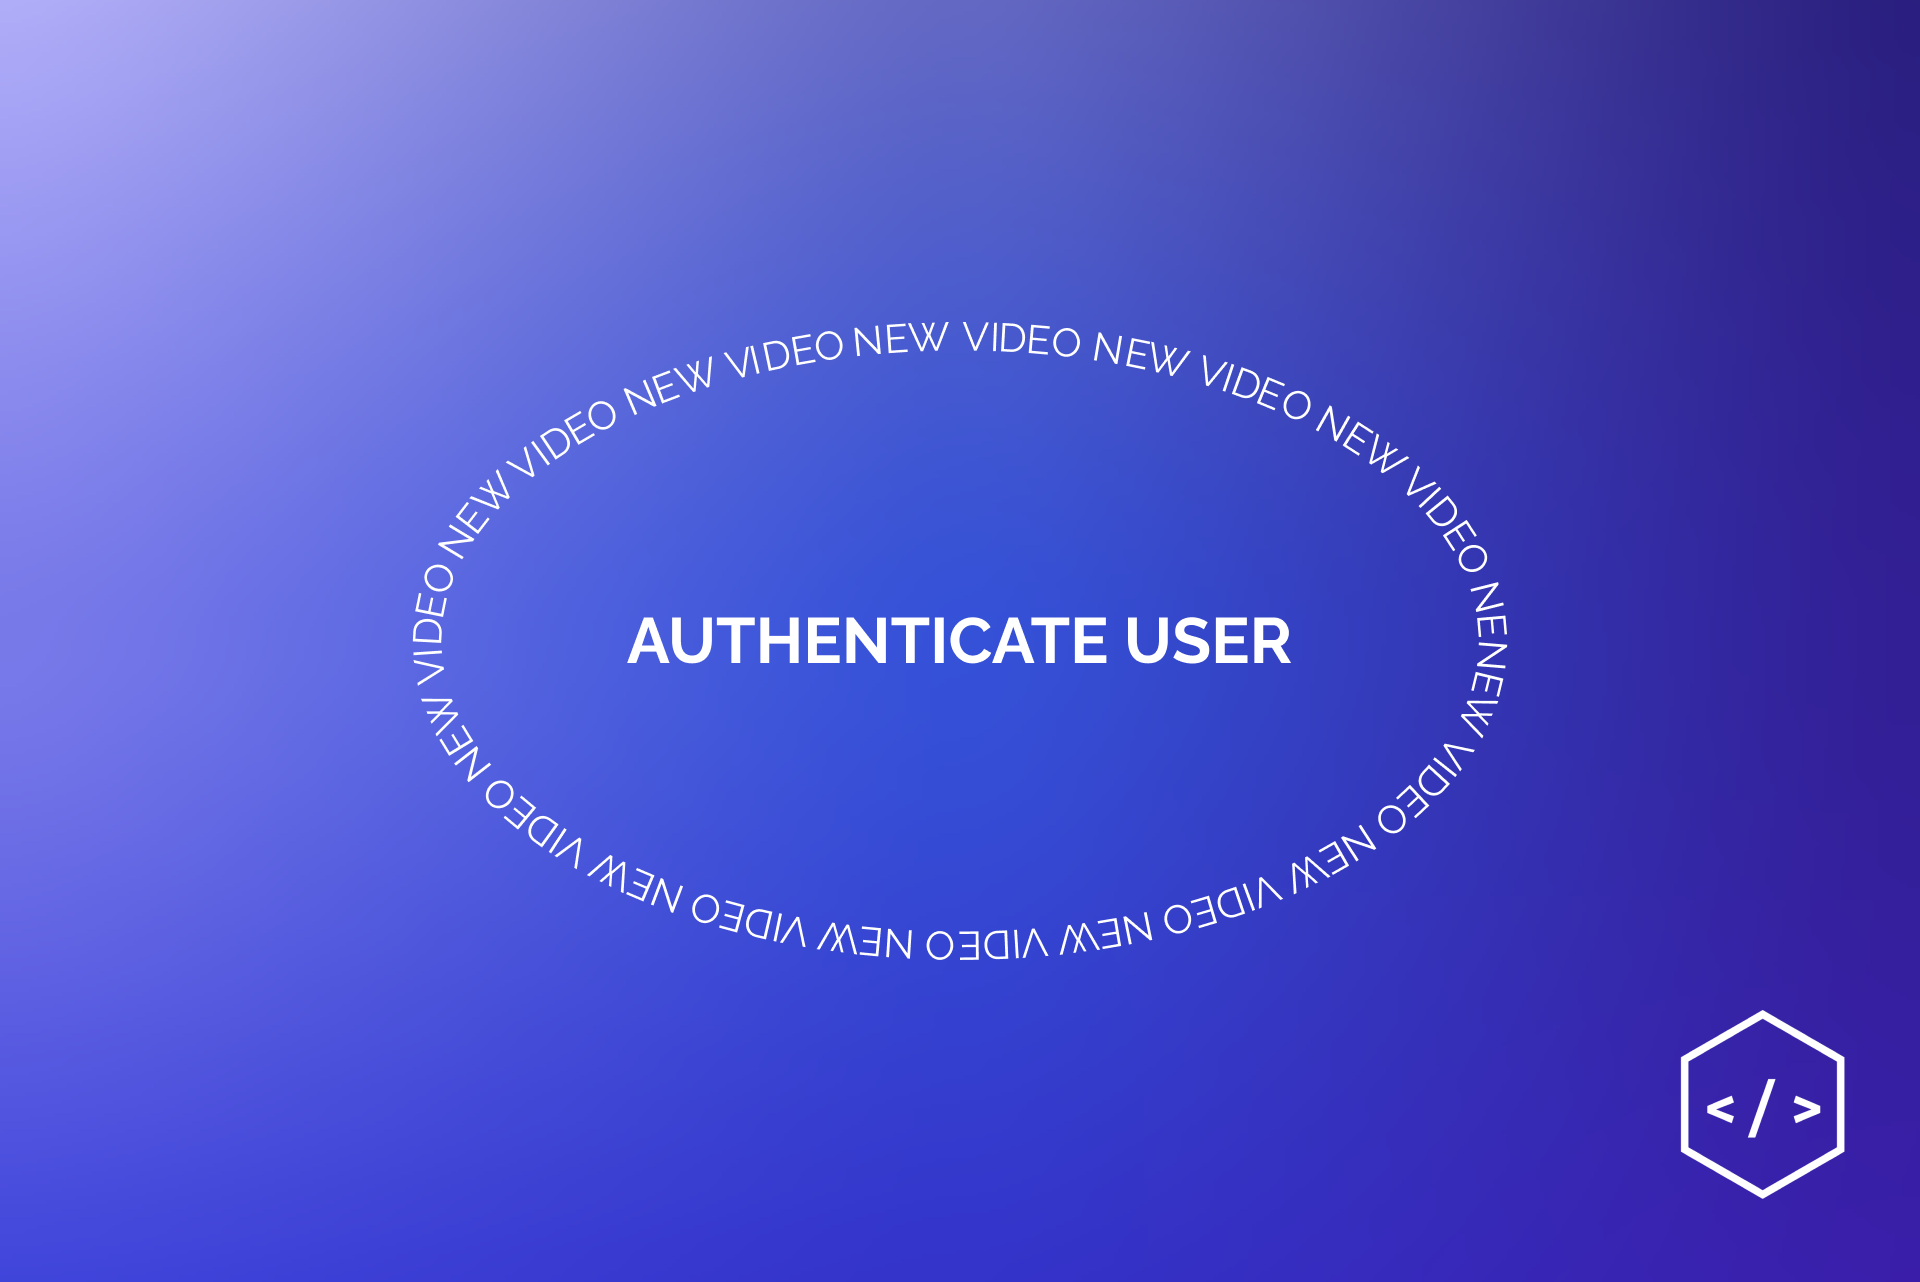 How to add user authentication?